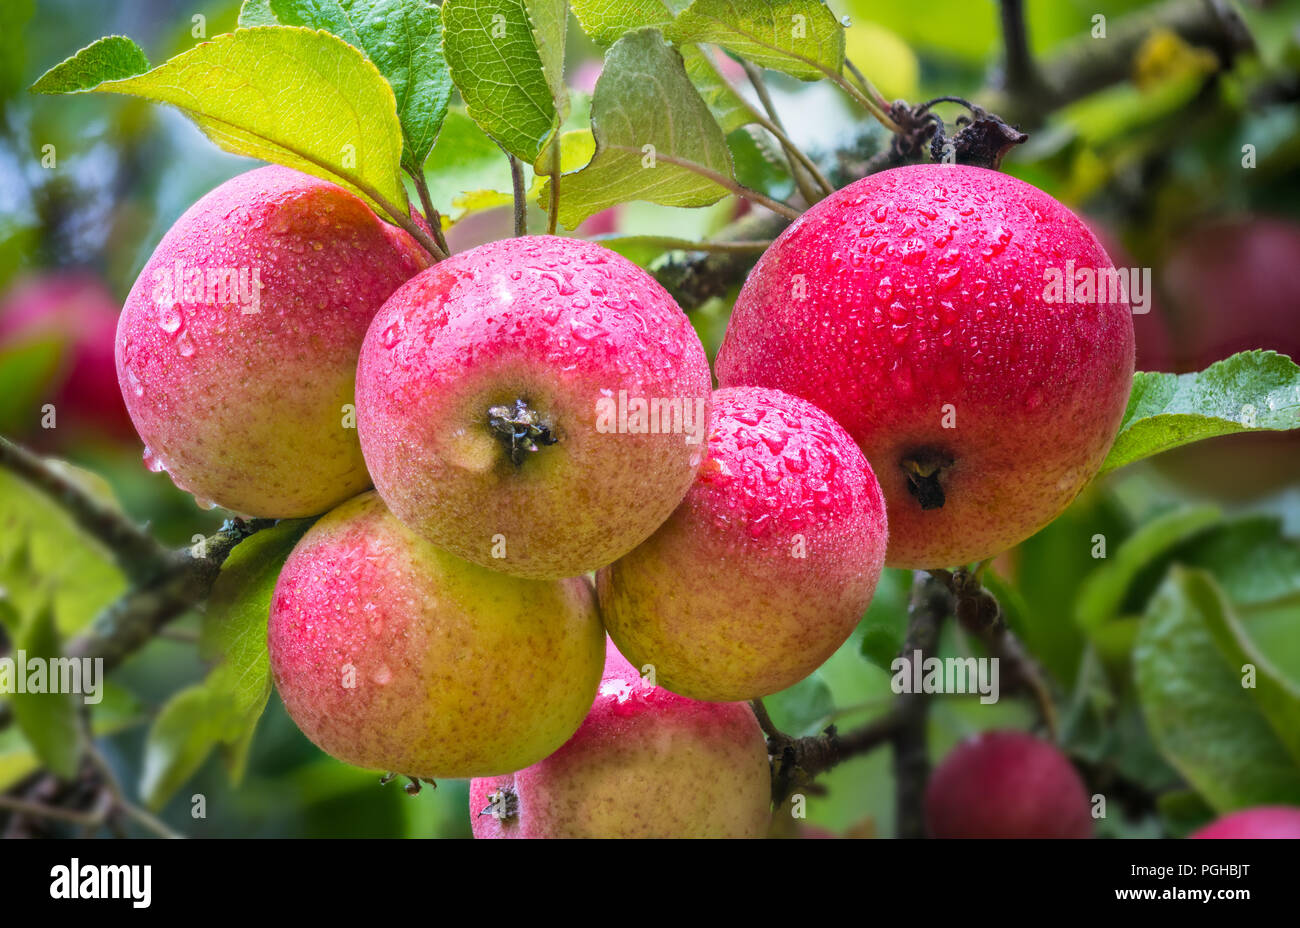 Group of beautiful aromatic apples in a garden. Malus domestica. Yummy sweet red fruits, rain drops. Apple tree branch, green leaves. Farming, orchard. Stock Photo